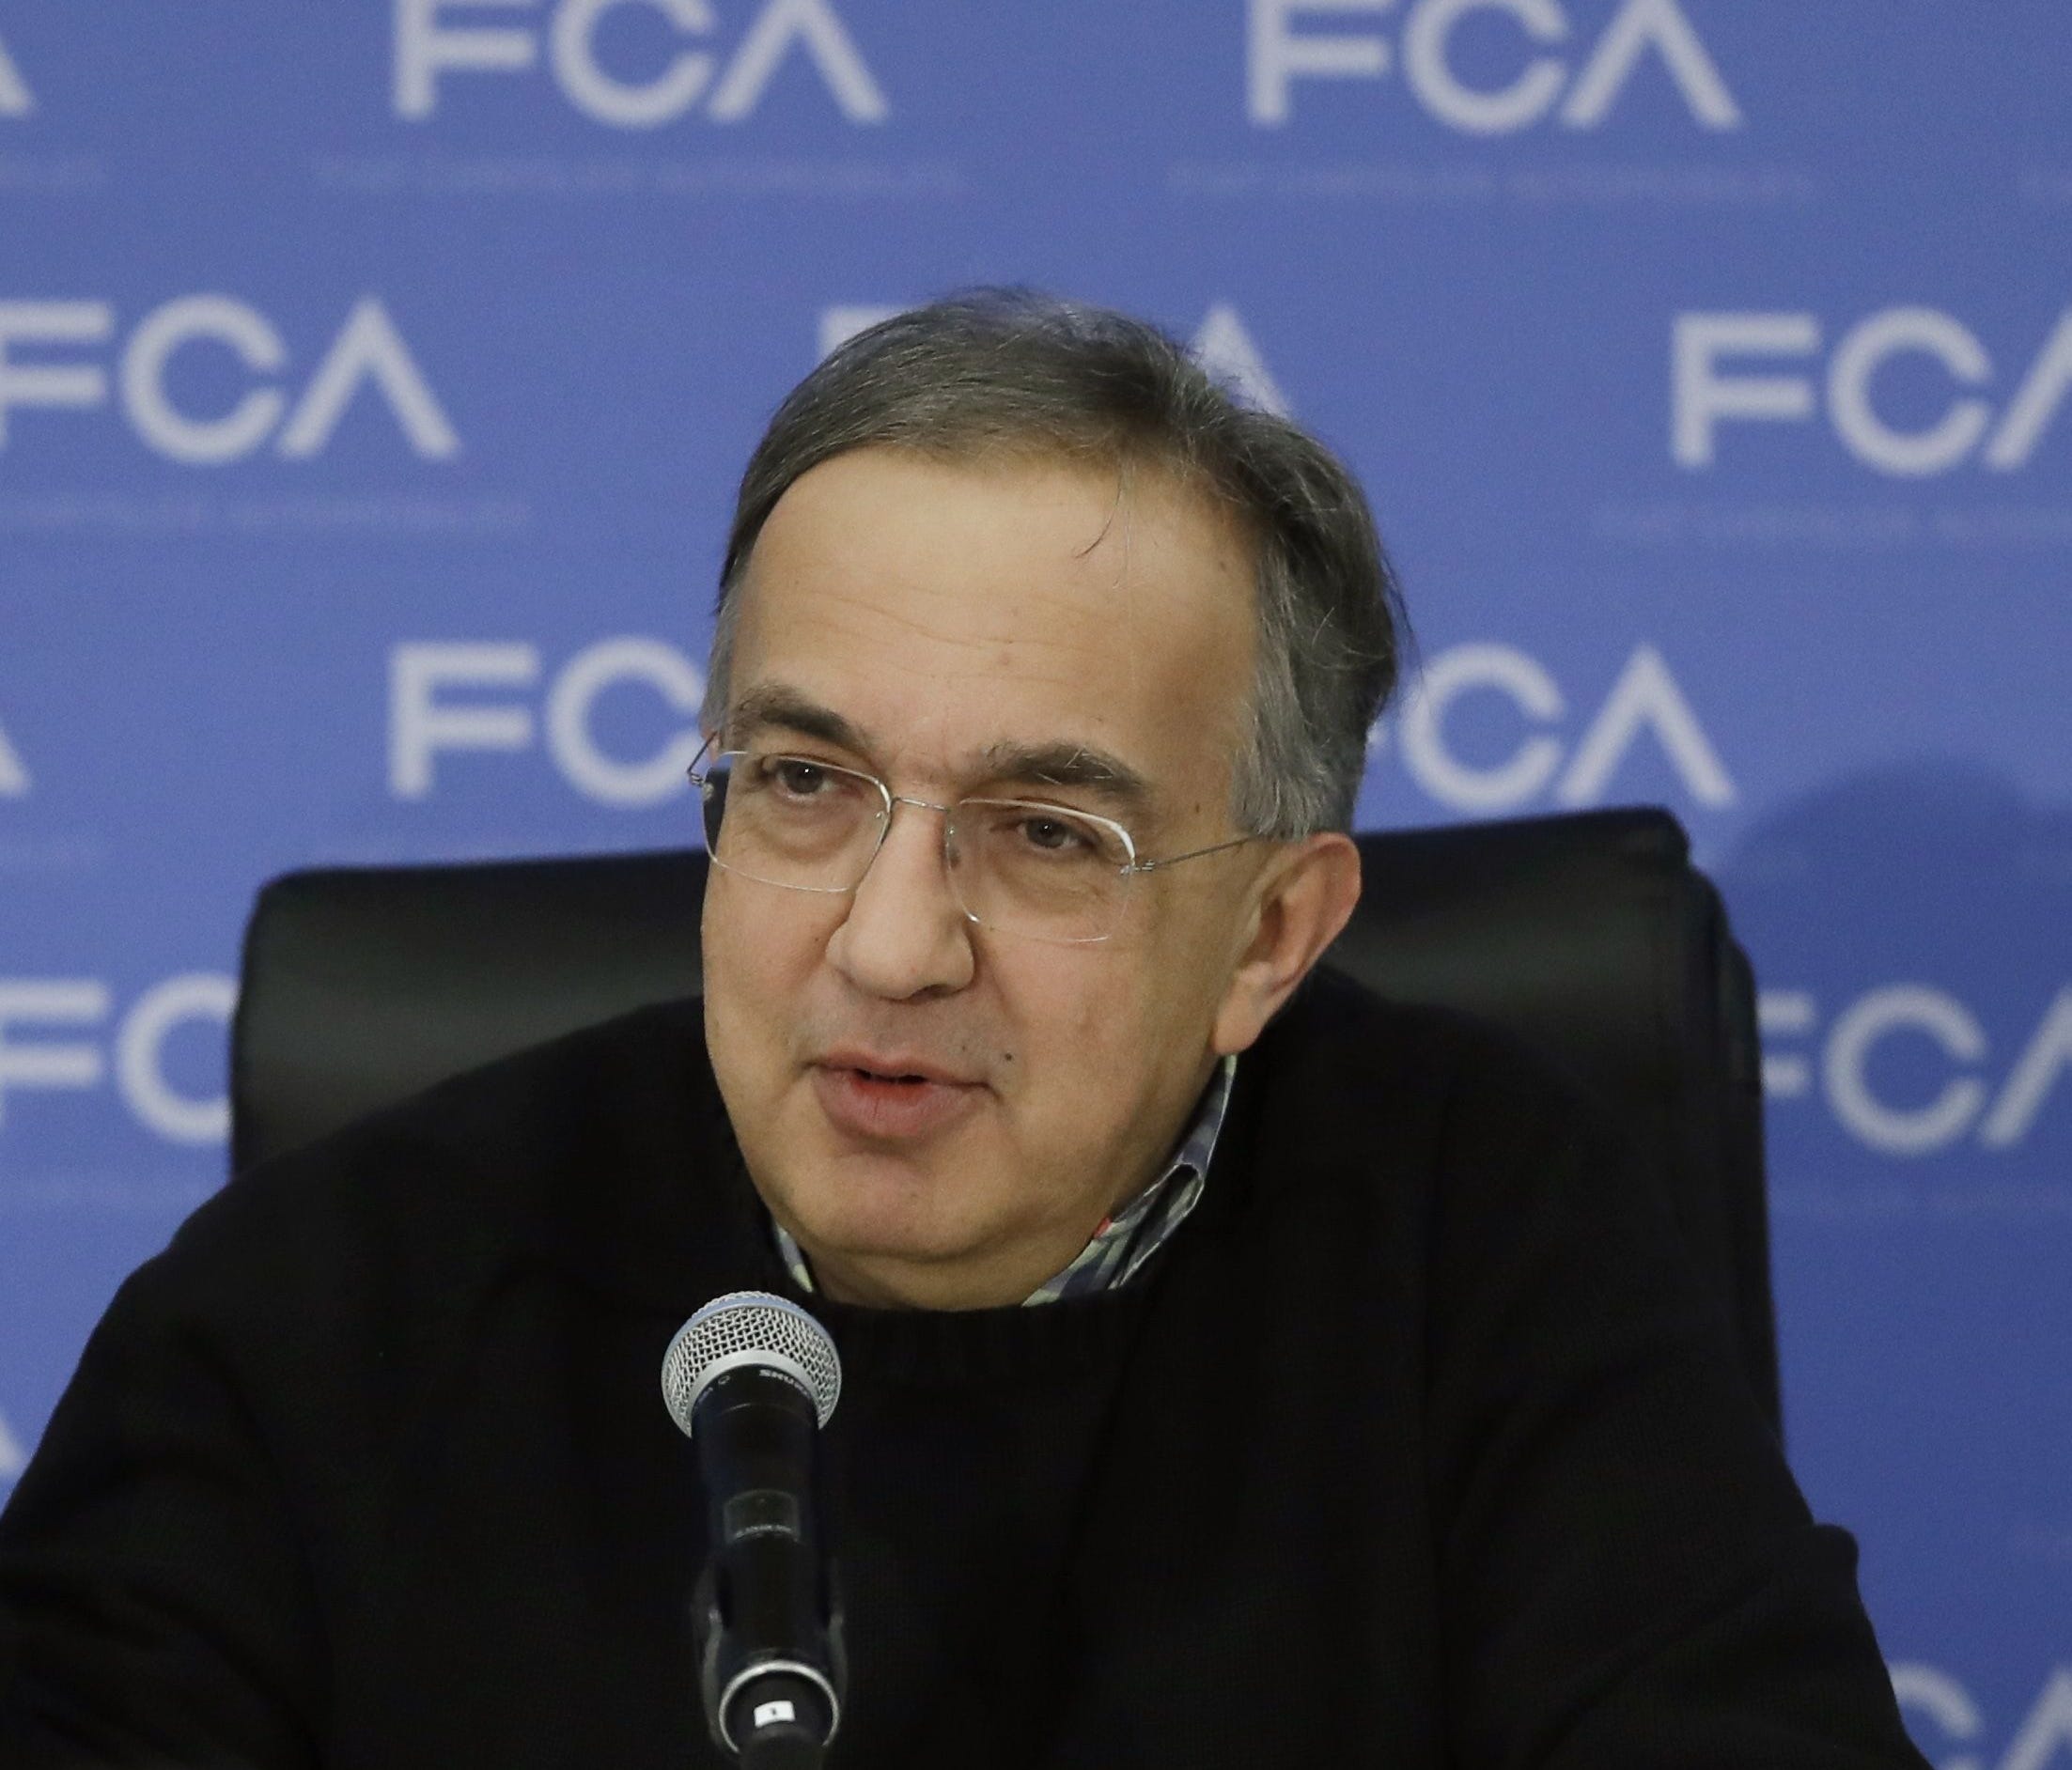 Fiat Chrysler CEO Sergio Marchionne in a file photo